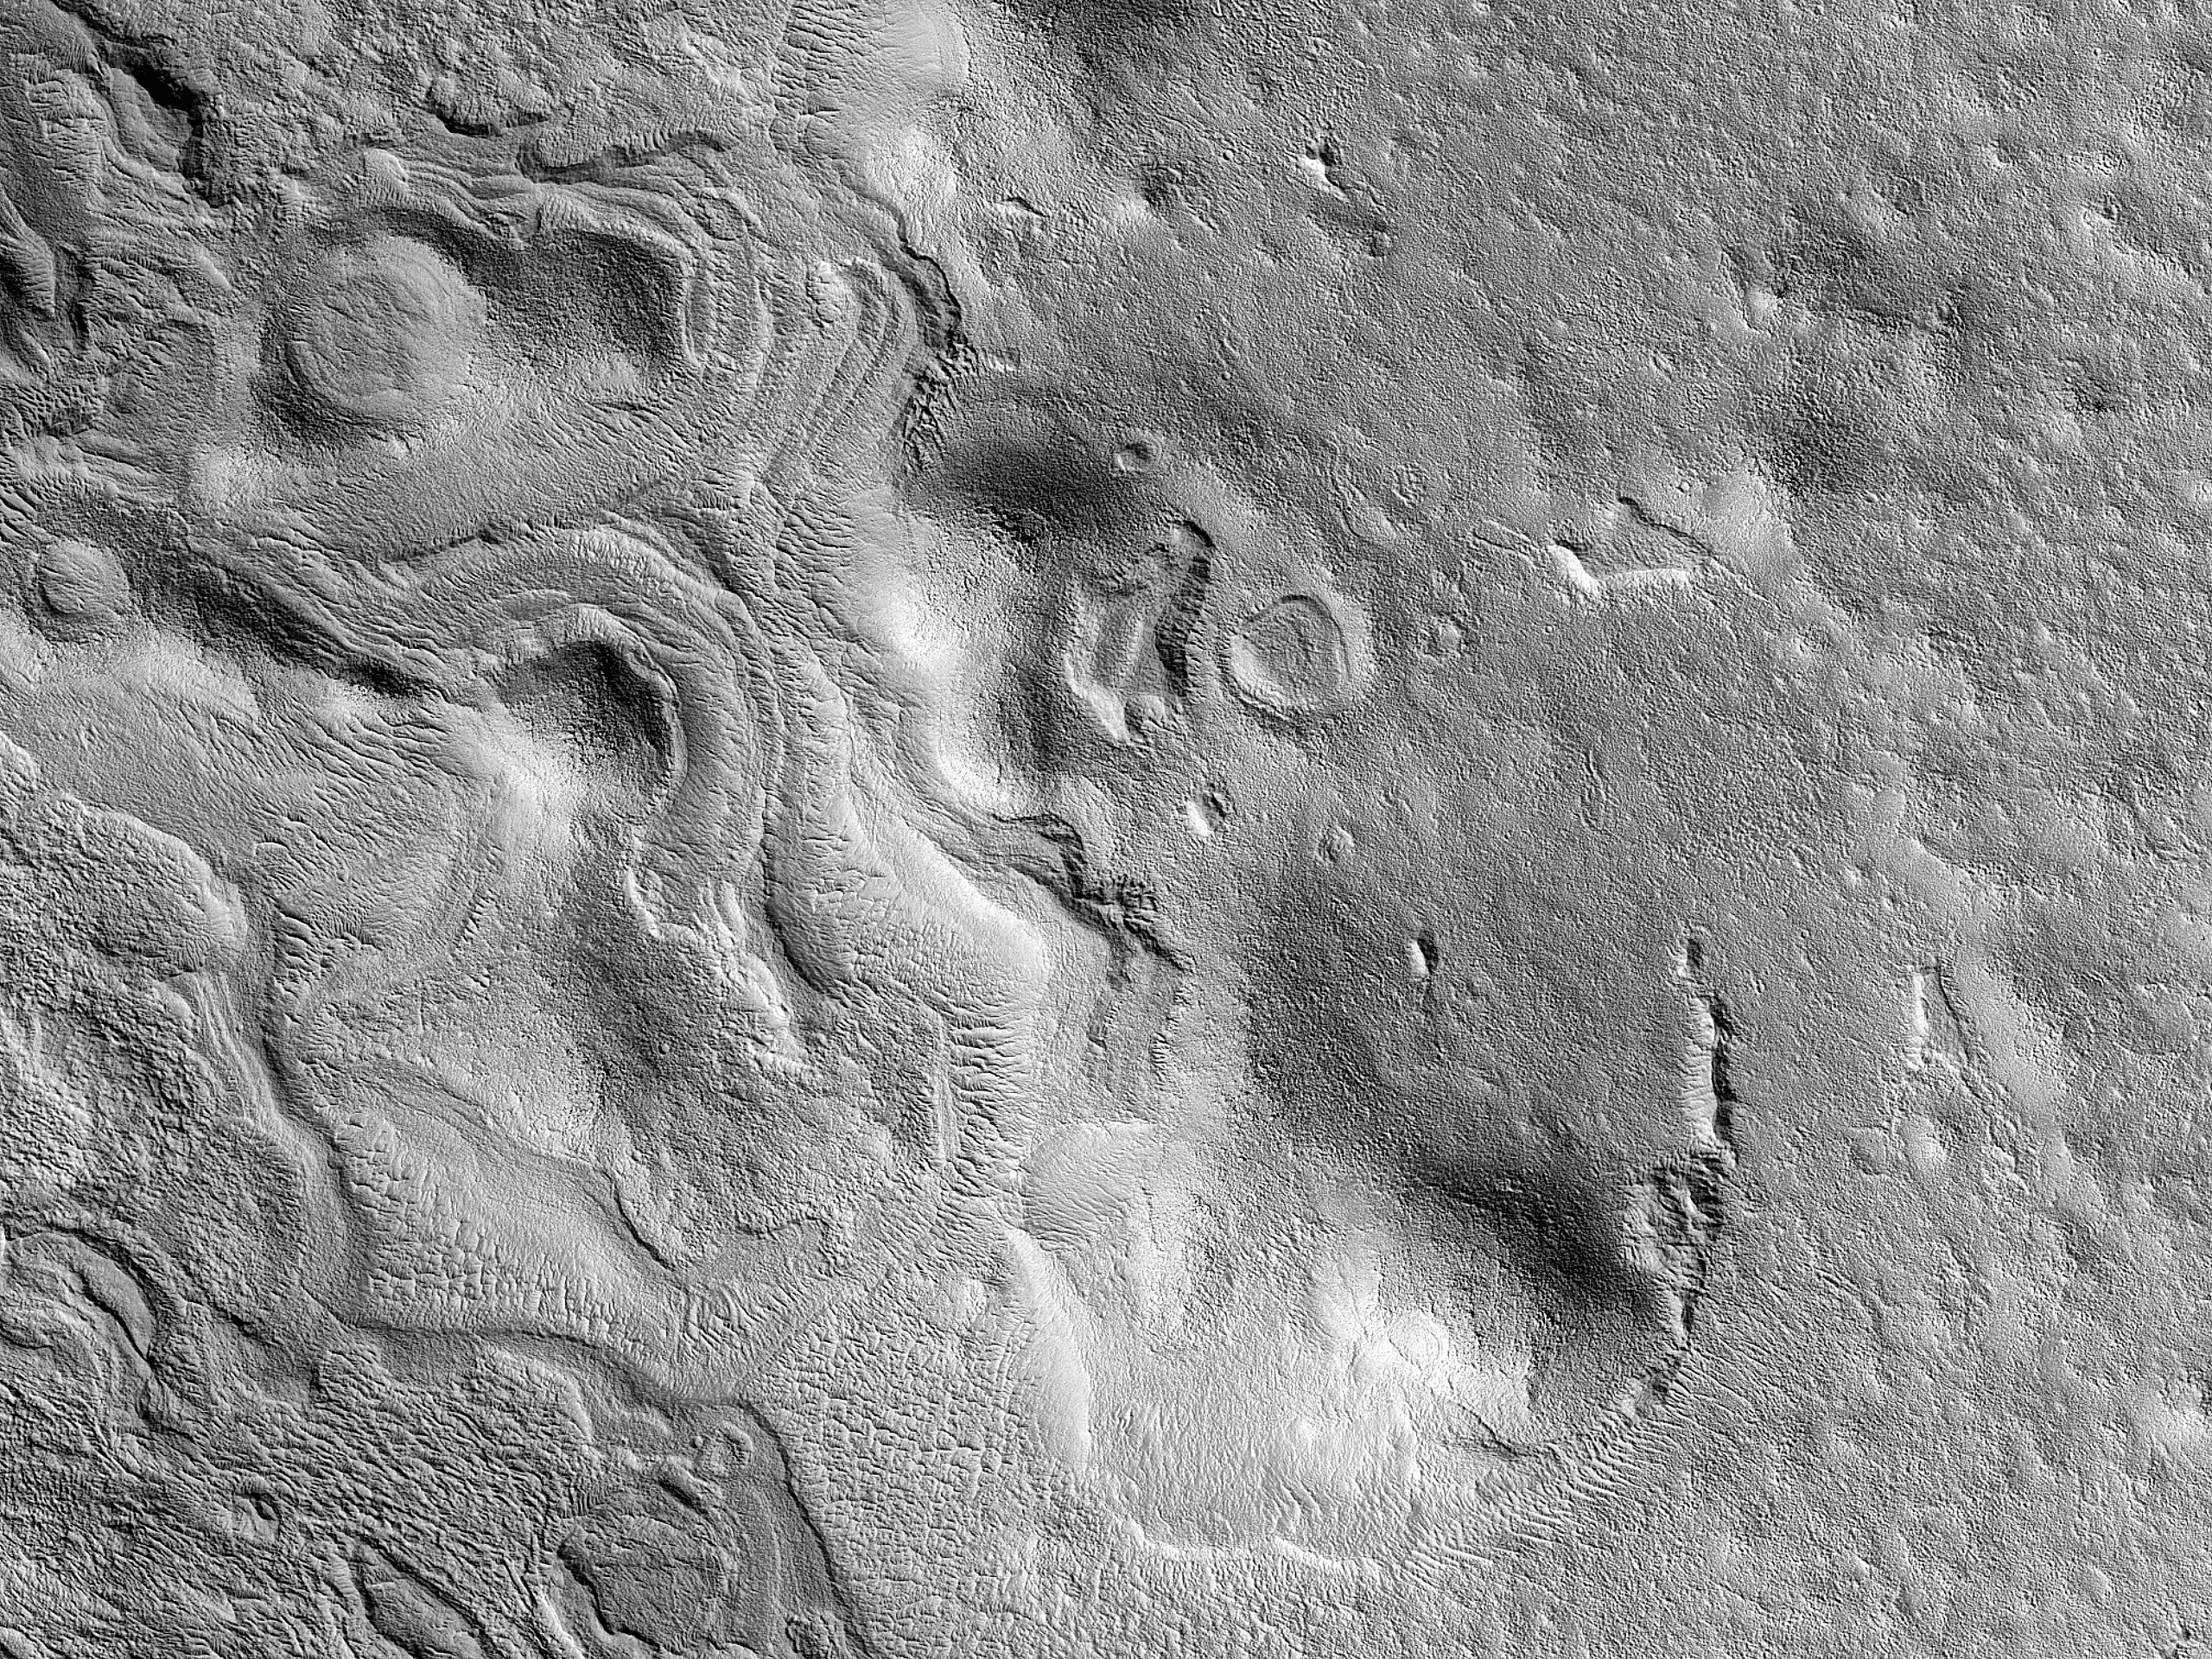 Layers in Center of Cerulli Crater